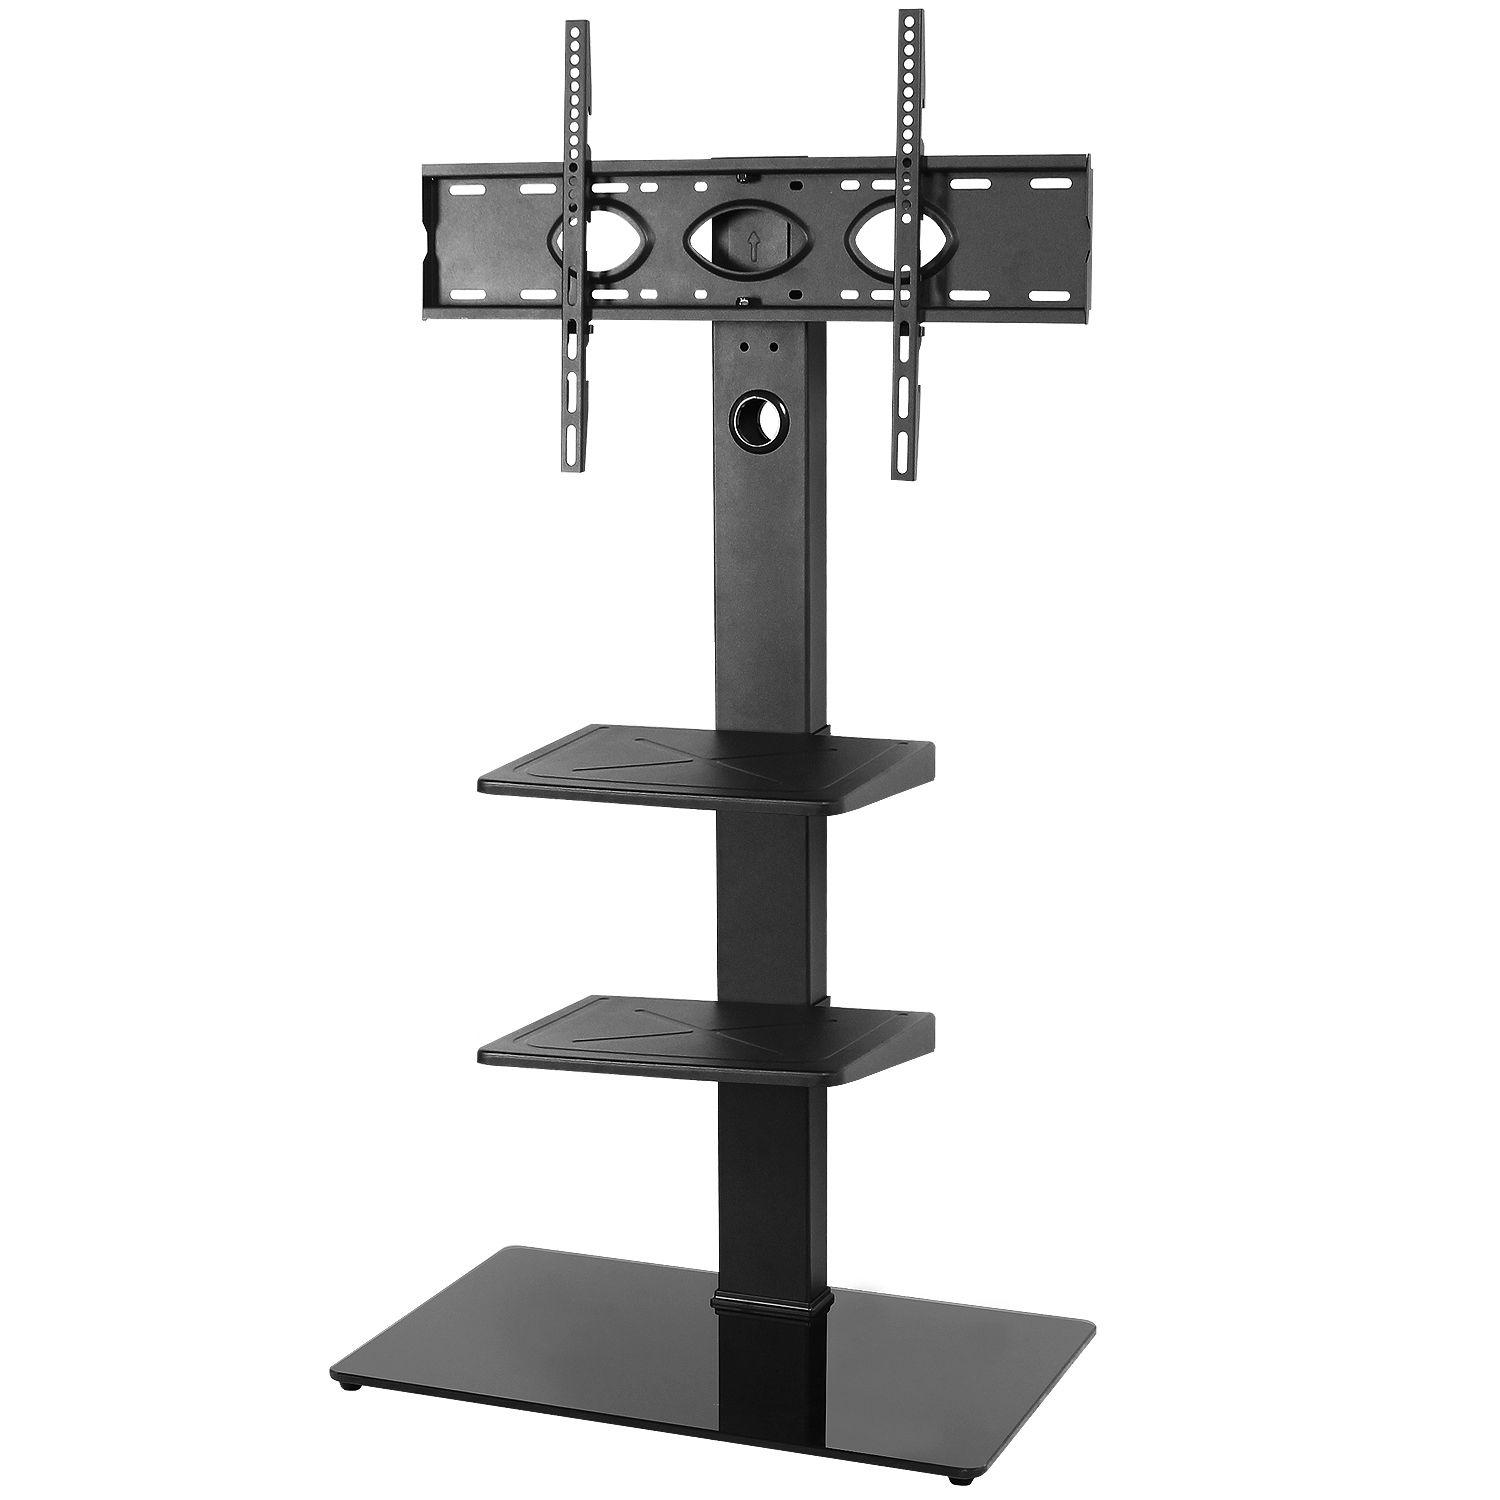 5rcom Floor Corner Tall Tv Stand With Swivel Mount For 32 Inside Adrien Tv Stands For Tvs Up To 65" (View 7 of 15)